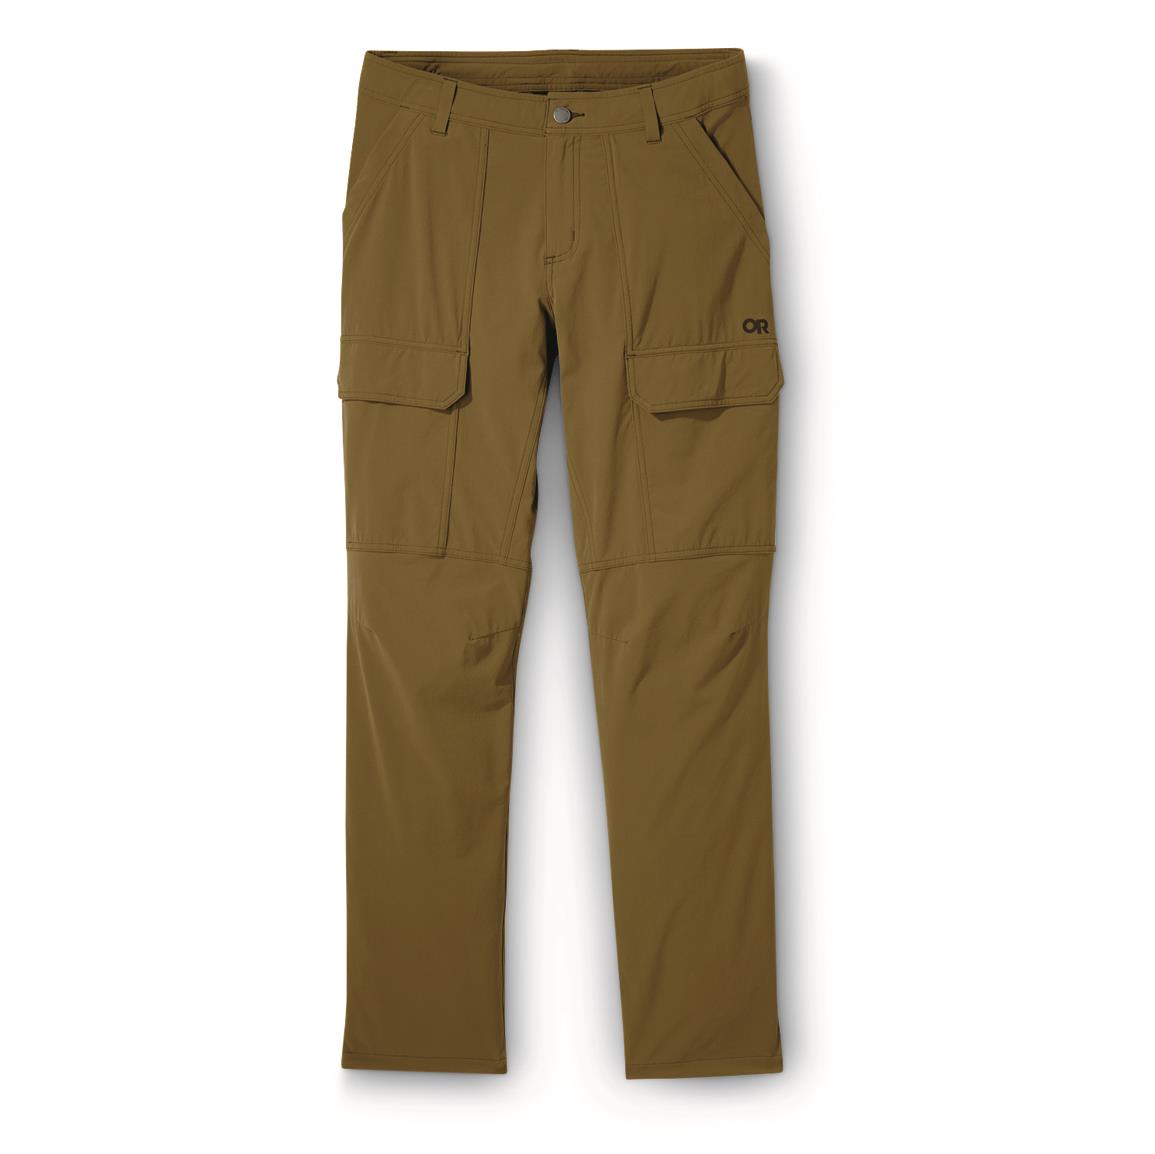 Guide Gear Men's Outdoor 2.0 Flannel-Lined Cotton Cargo Pants - 726739,  Jeans & Pants at Sportsman's Guide